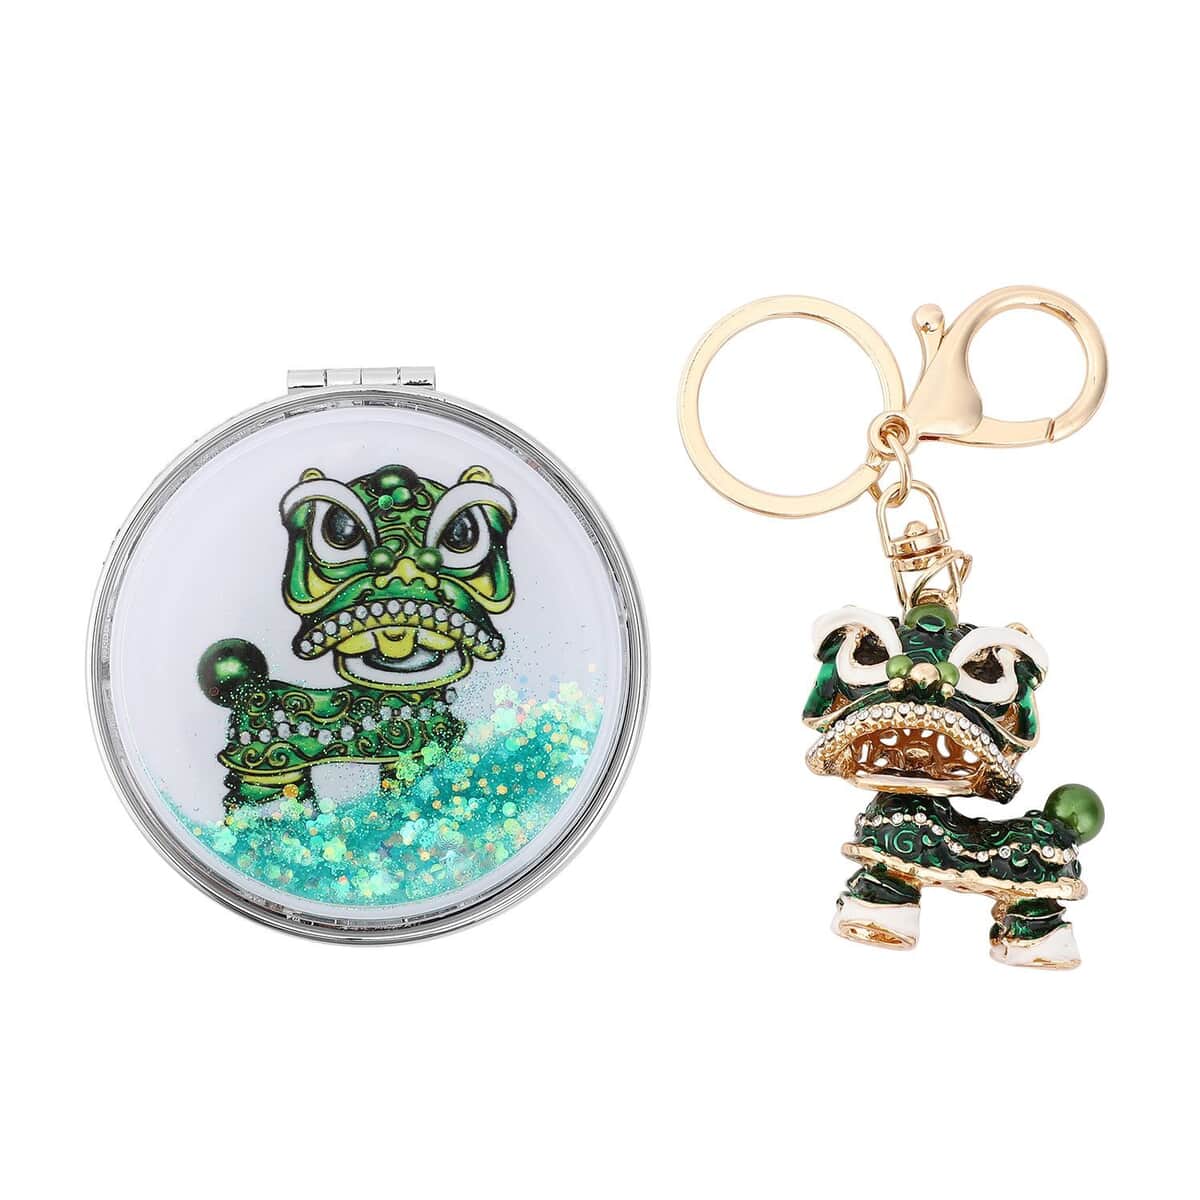 White Austrian Crystal and Enameled Dragon Keychain and Mirror in Goldtone, Crystal Keychain and Compact Mirror for Purse, Handbag Keychain image number 0